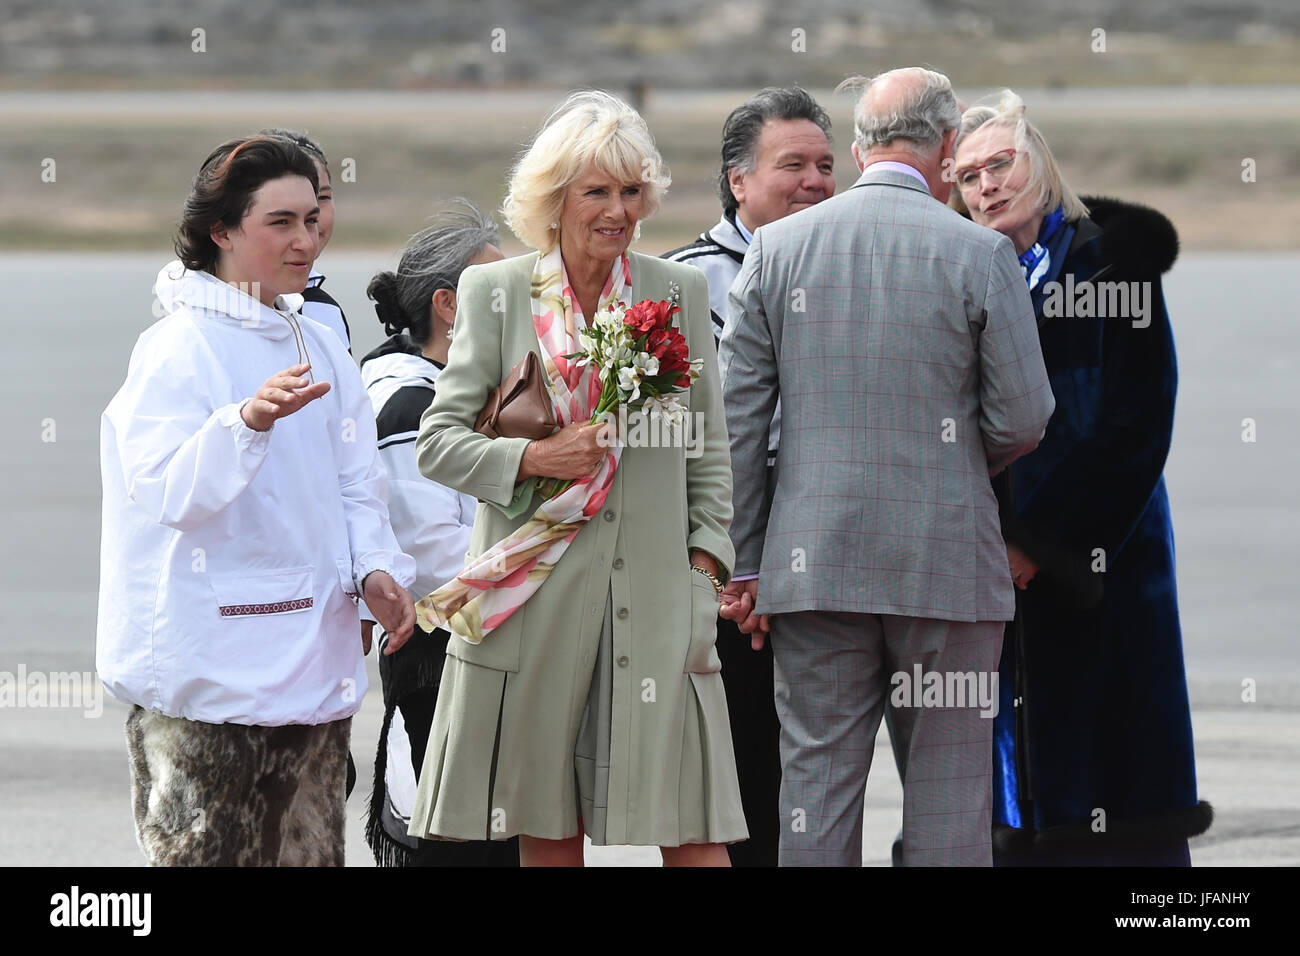 The Prince of Wales and the Duchess of Cornwall arrive at Iqaluit, the capital city of the Canadian territory of Nunavut, at the start of their visit to Canada. Stock Photo